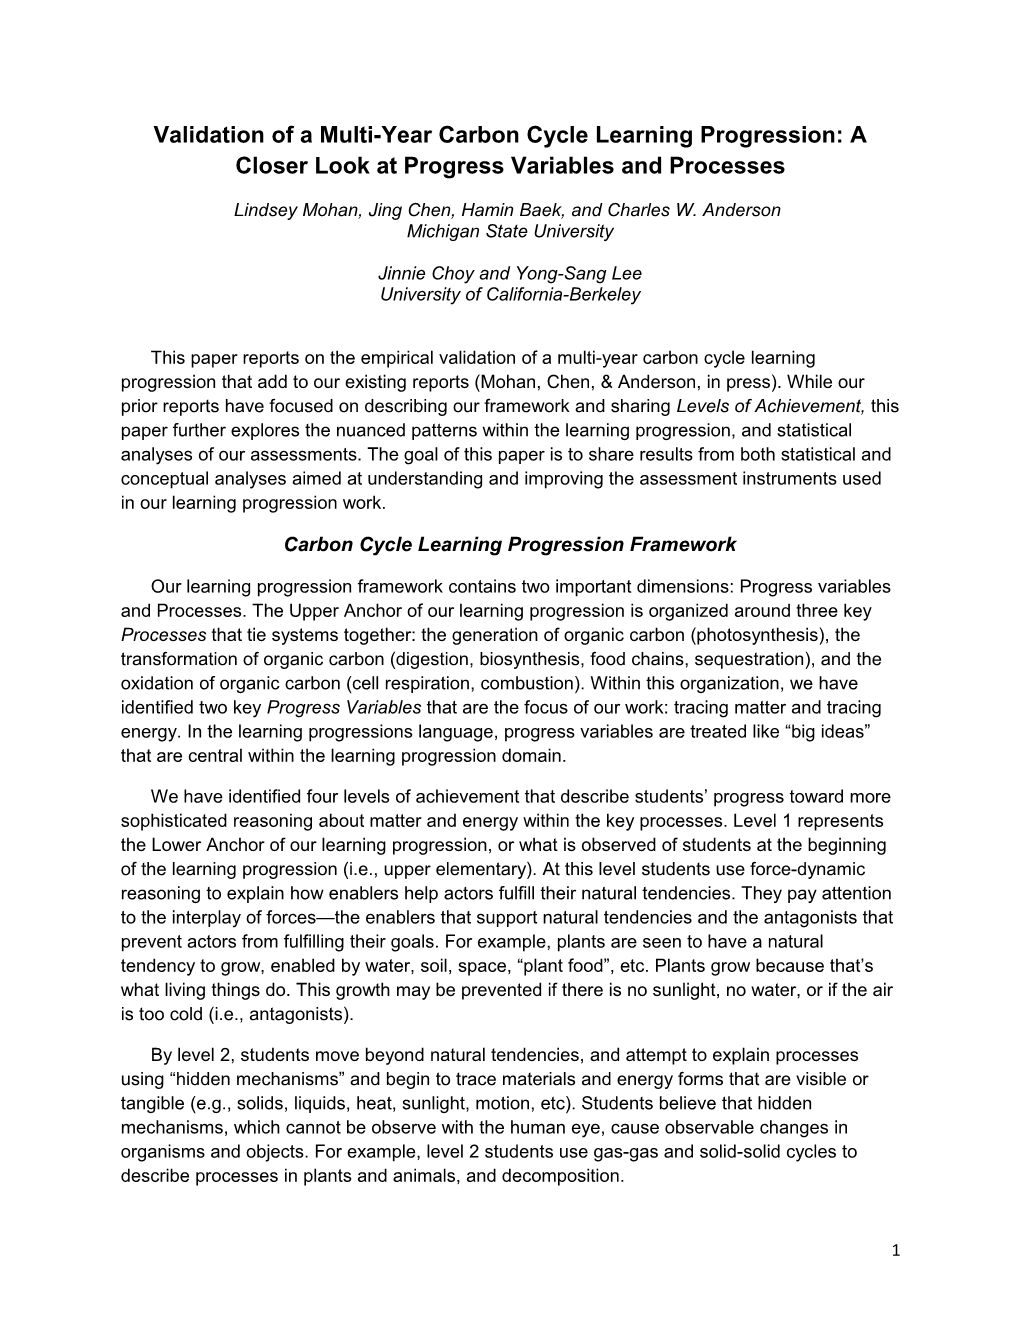 Carbon Cycle Learning Progression: a Closer Look at Progress Variables and Processes